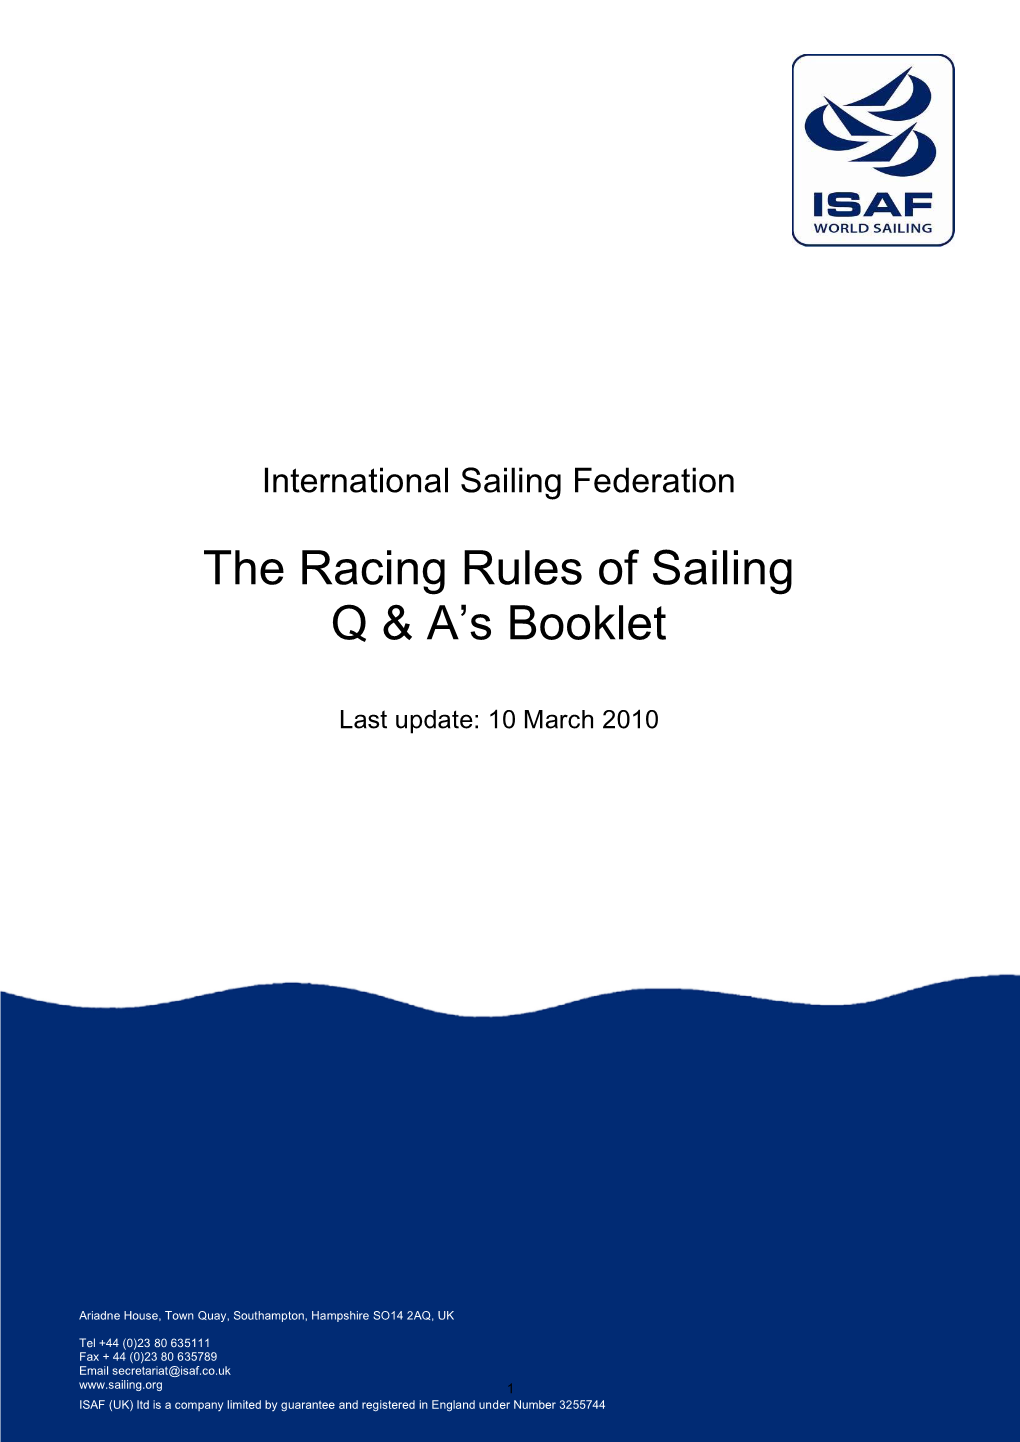 The Racing Rules of Sailing Q & A's Booklet